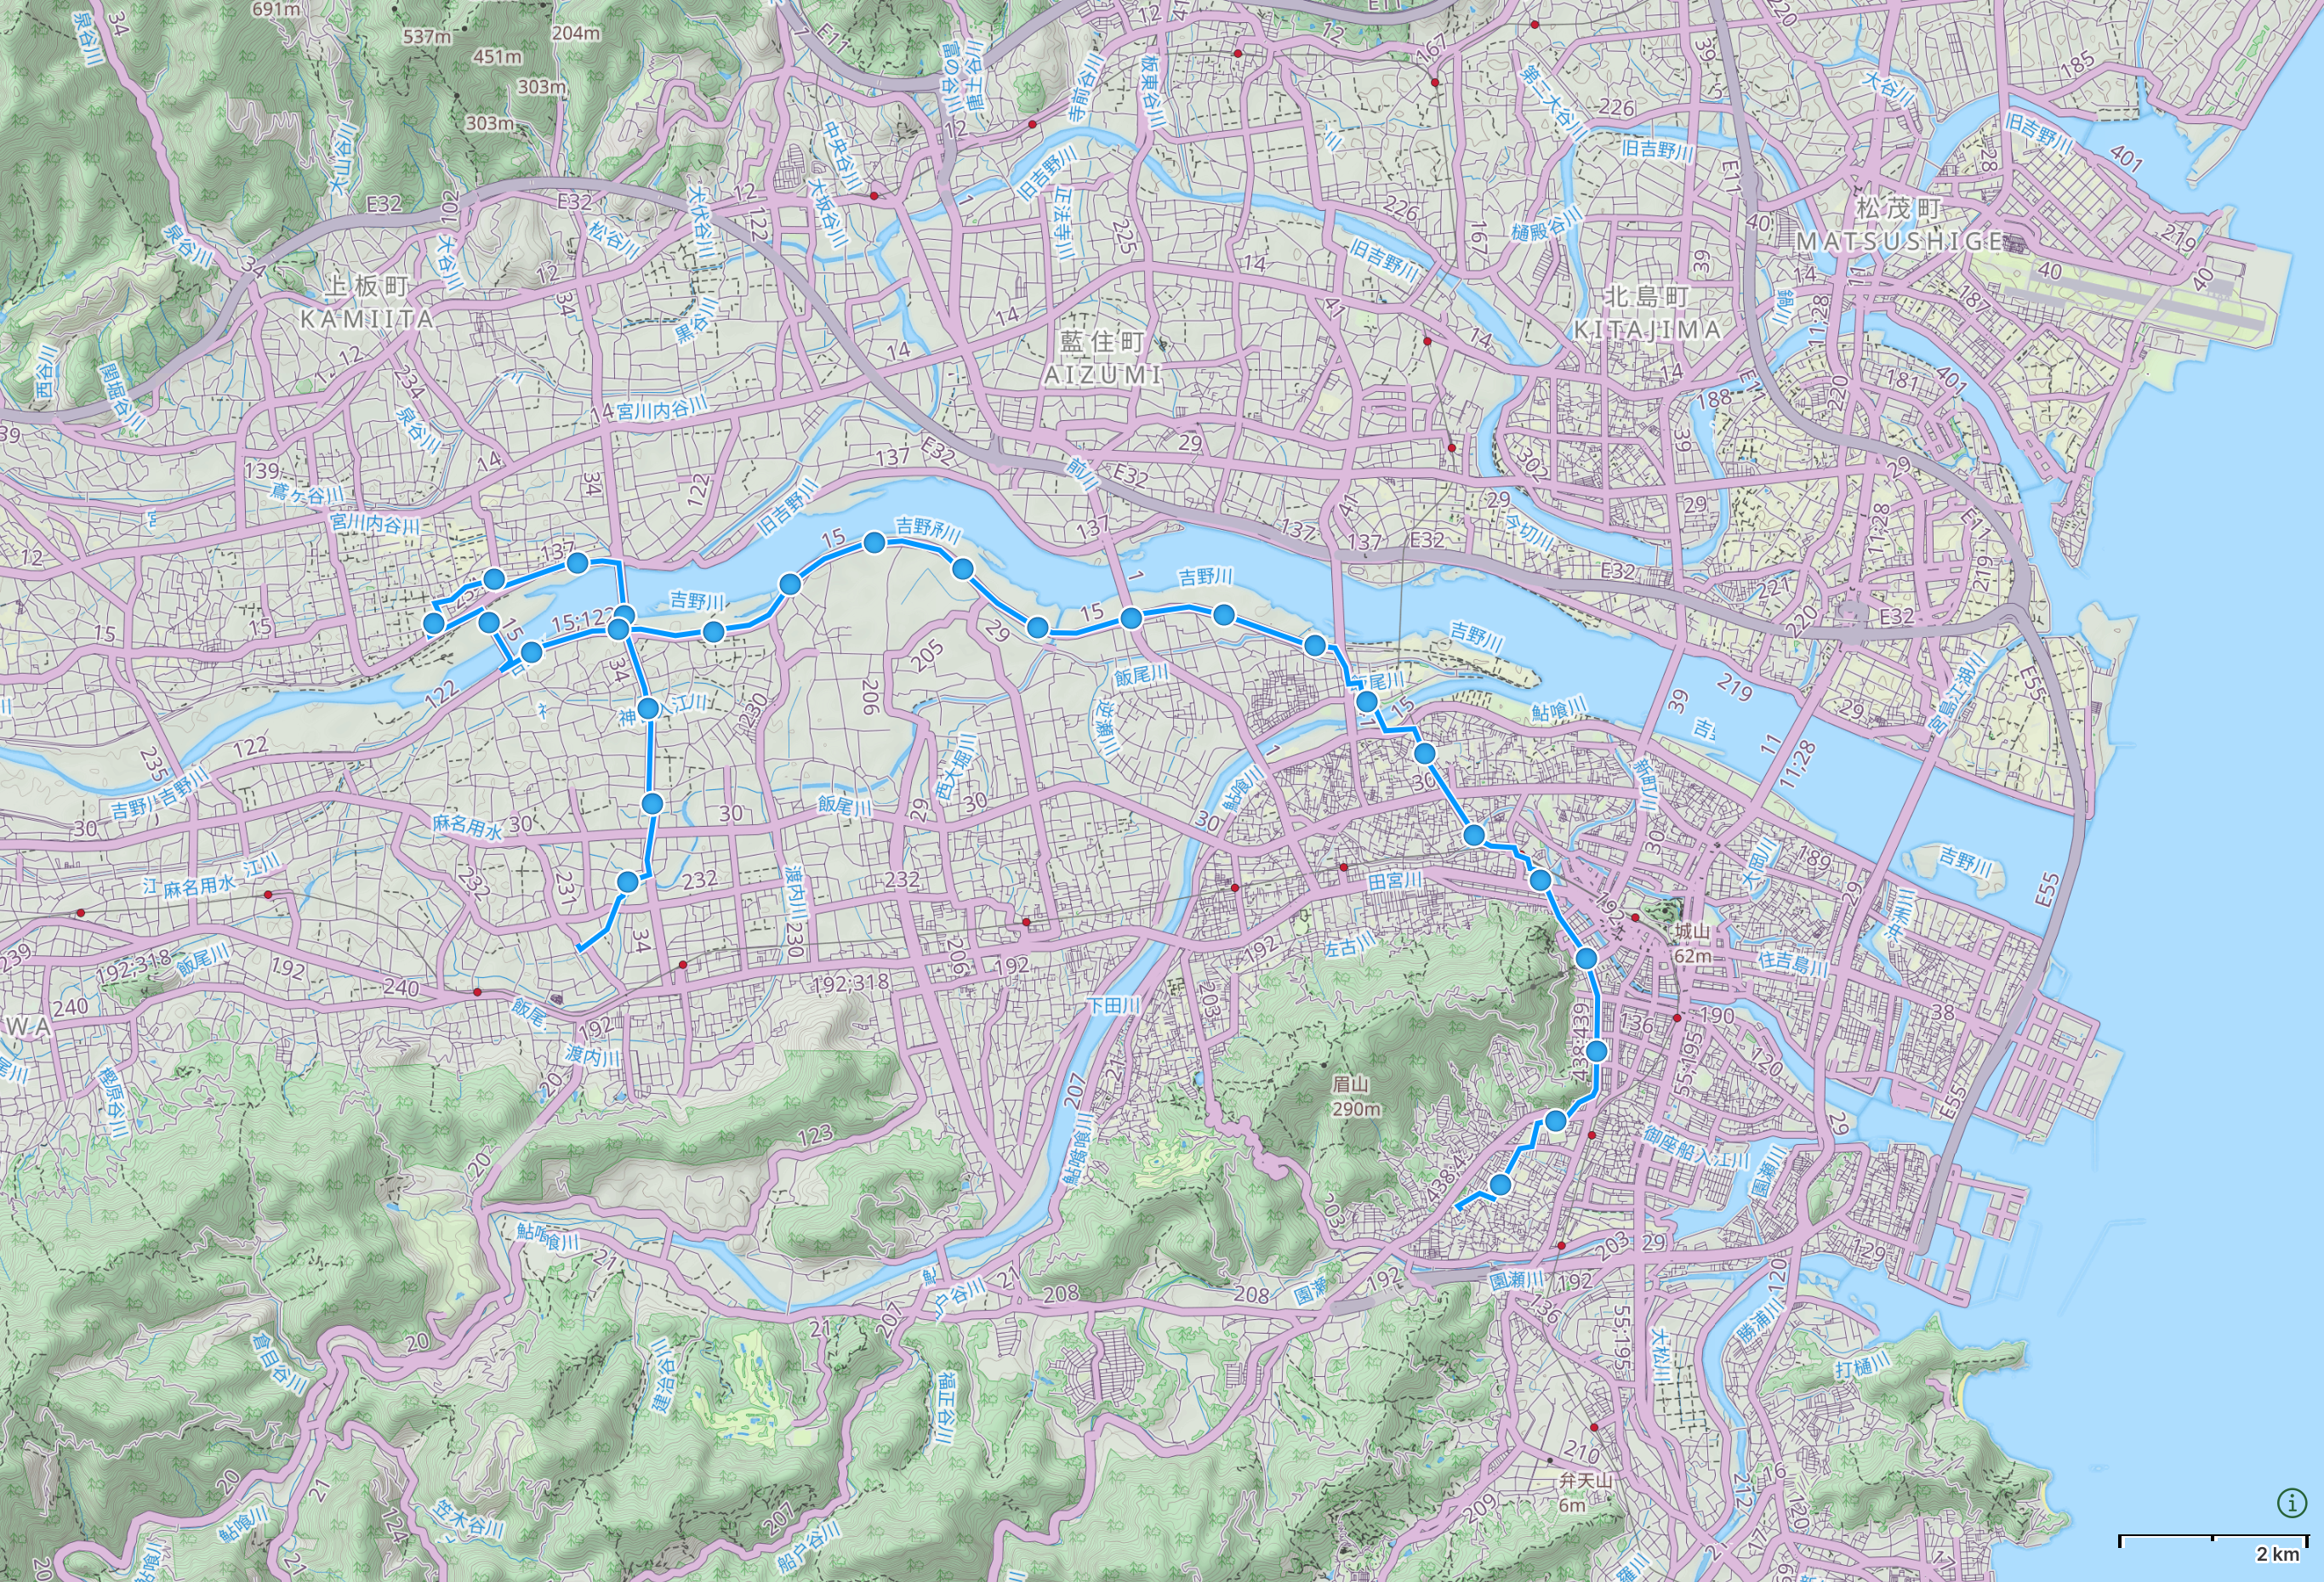 Map of Tokushima Prefecture with author’s route between Ishii and Tokushima City highlighted.